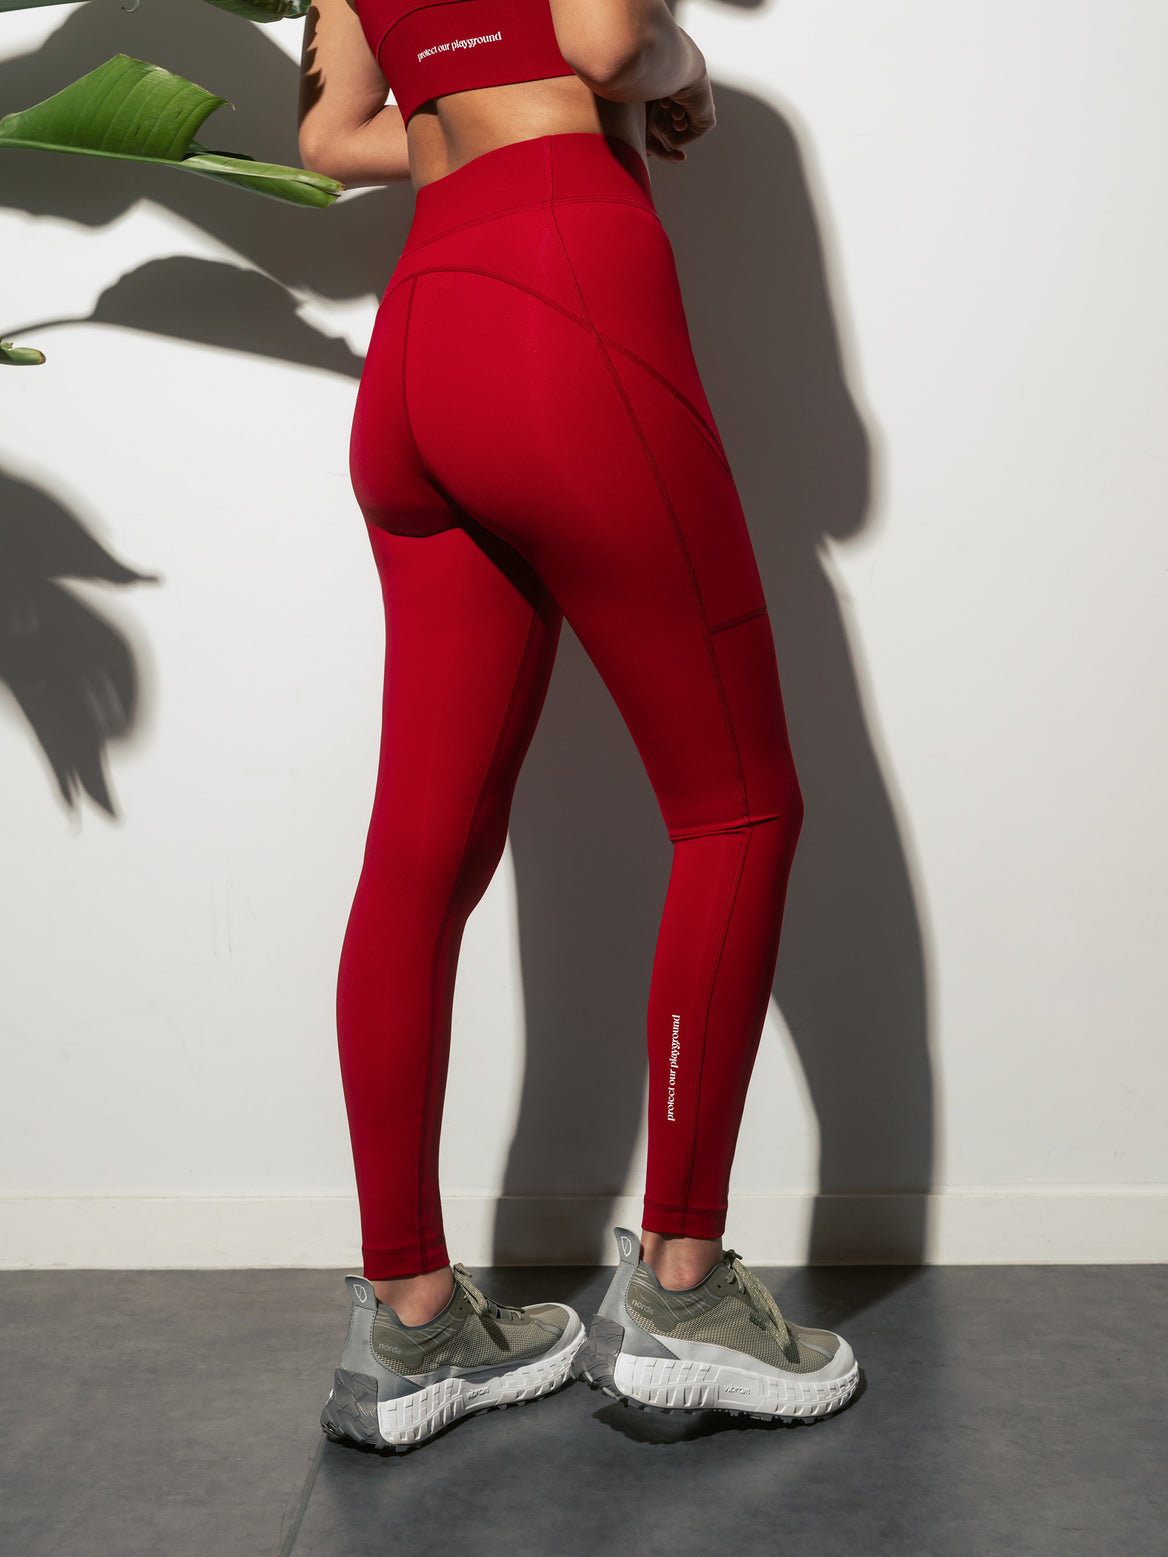 Shape Up Athletics  Caught Red Handed Leggings